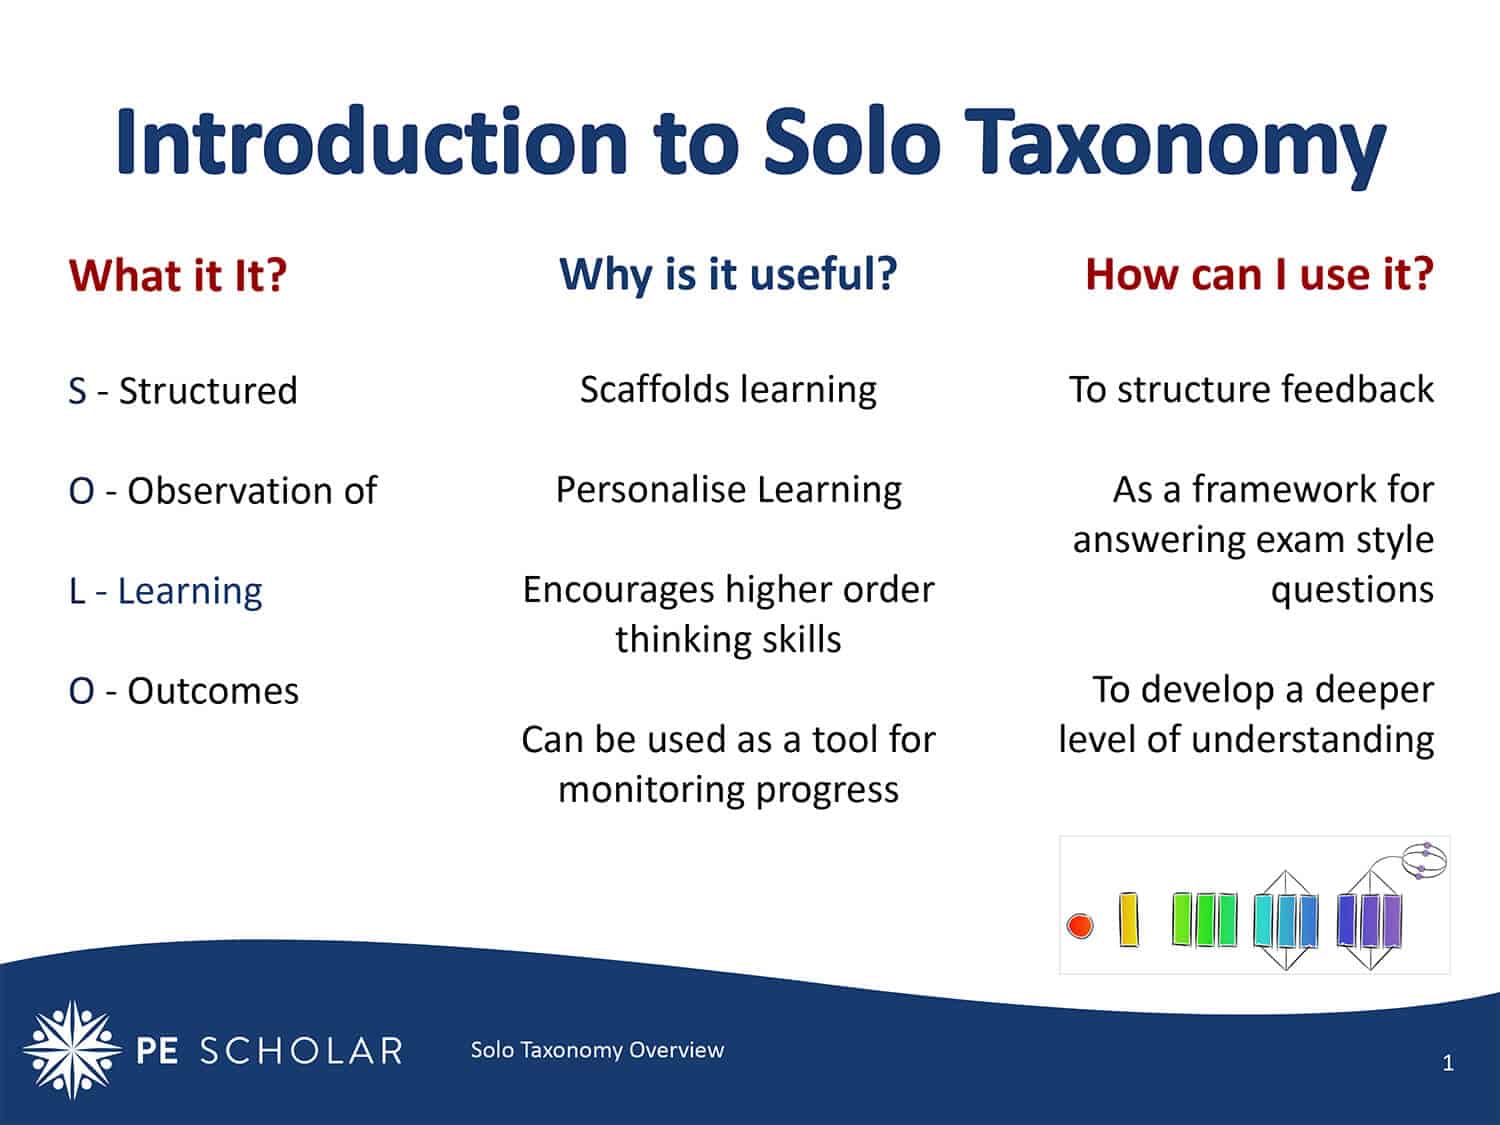 Solo Taxonomy – What is it and how do you use it?